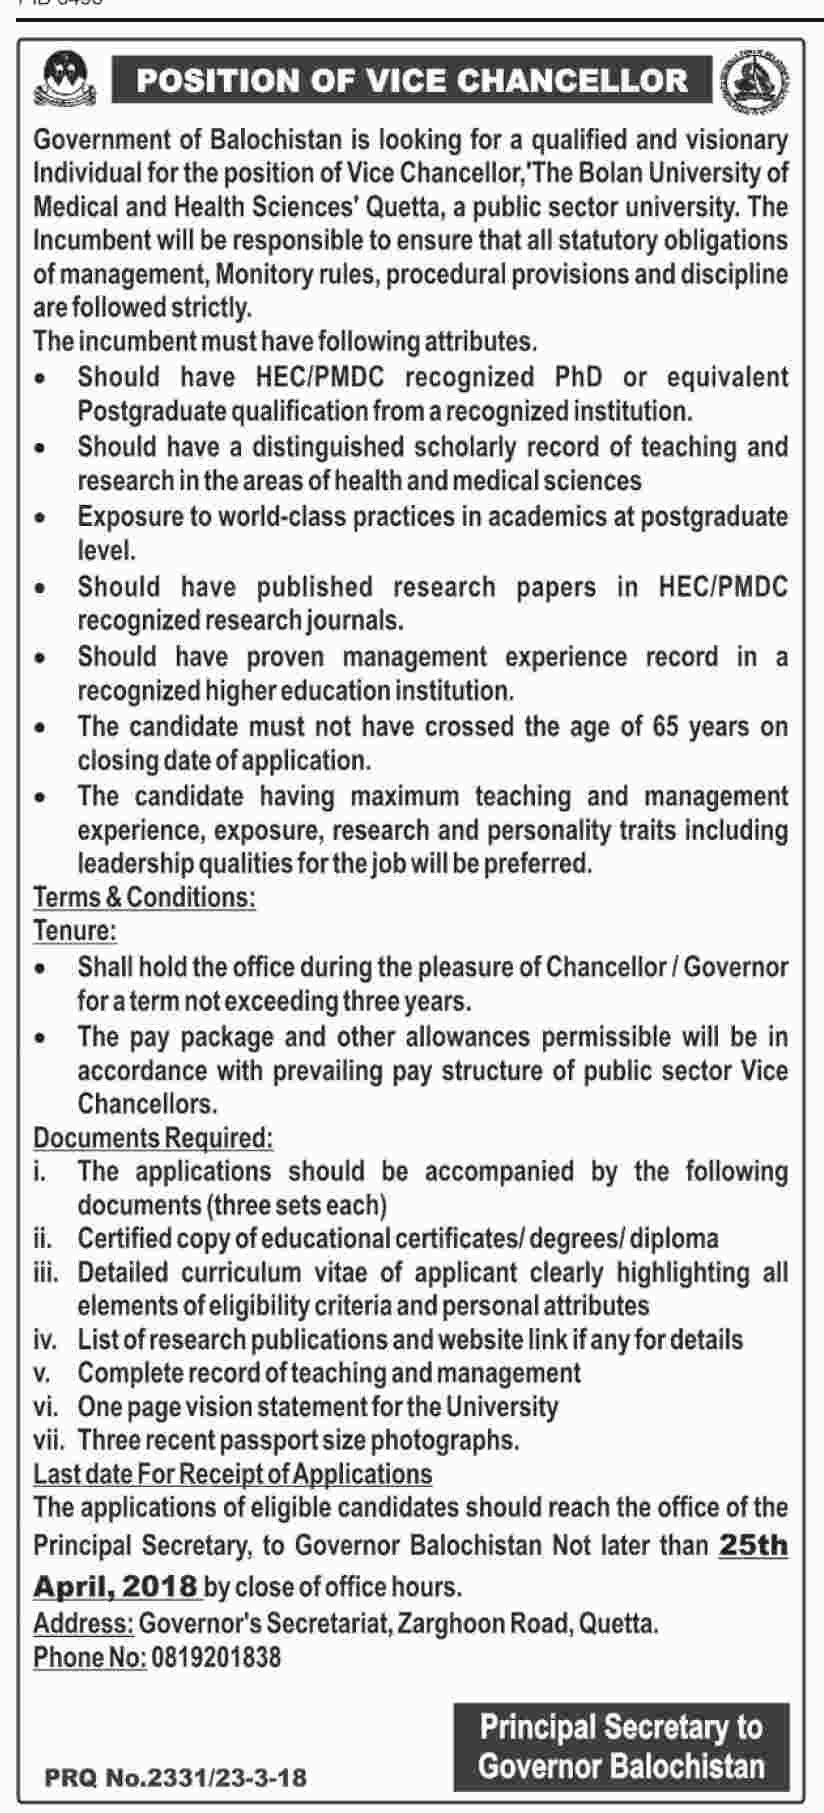 Jobs In The Bolan University Of Medical And Health Sciences 25 Mar 2018